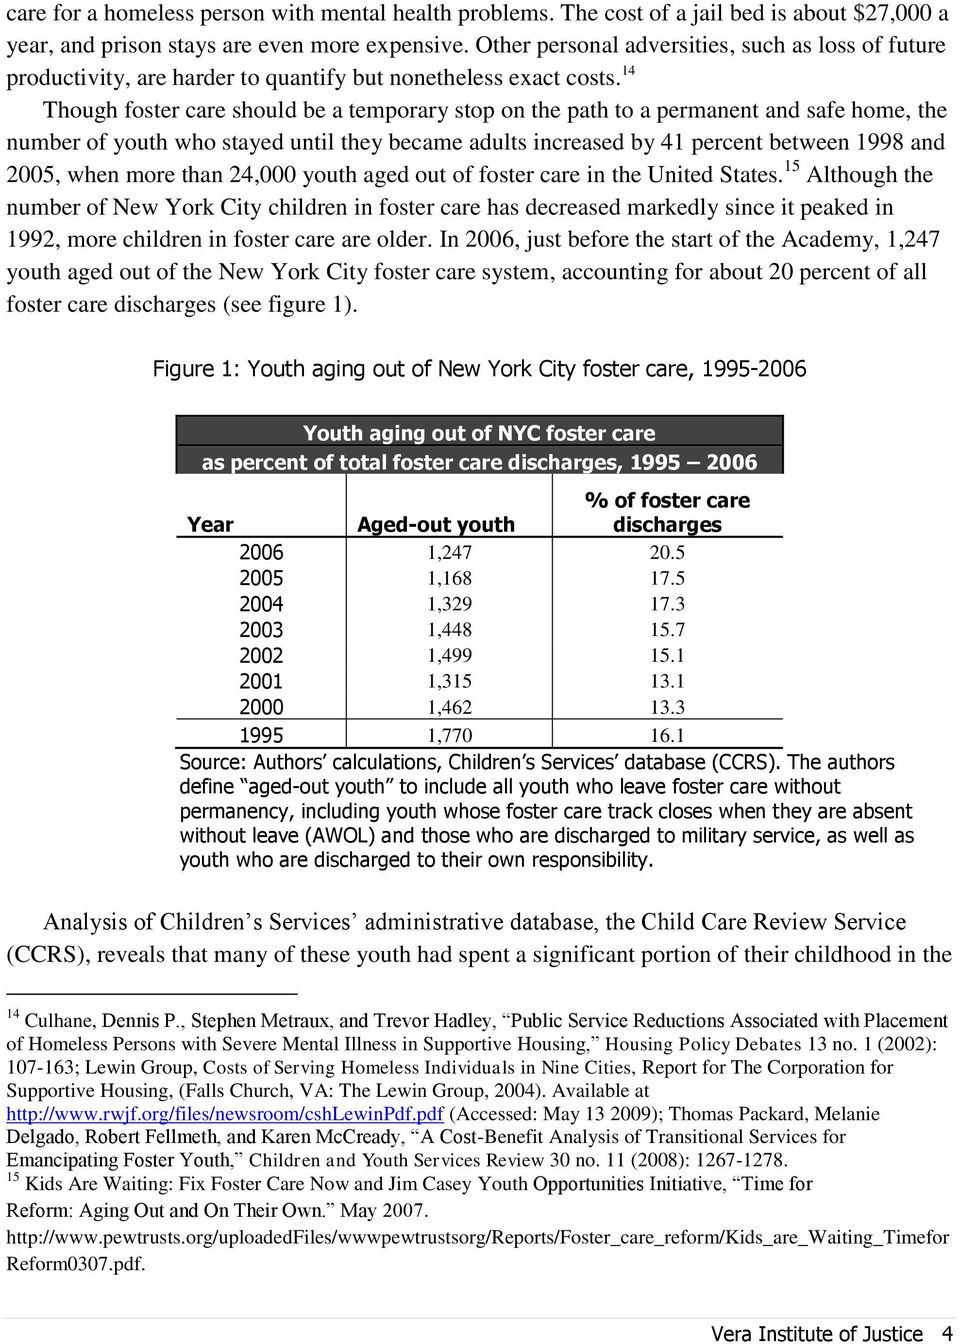 14 Though foster care should be a temporary stop on the path to a permanent and safe home, the number of youth who stayed until they became adults increased by 41 percent between 1998 and 2005, when